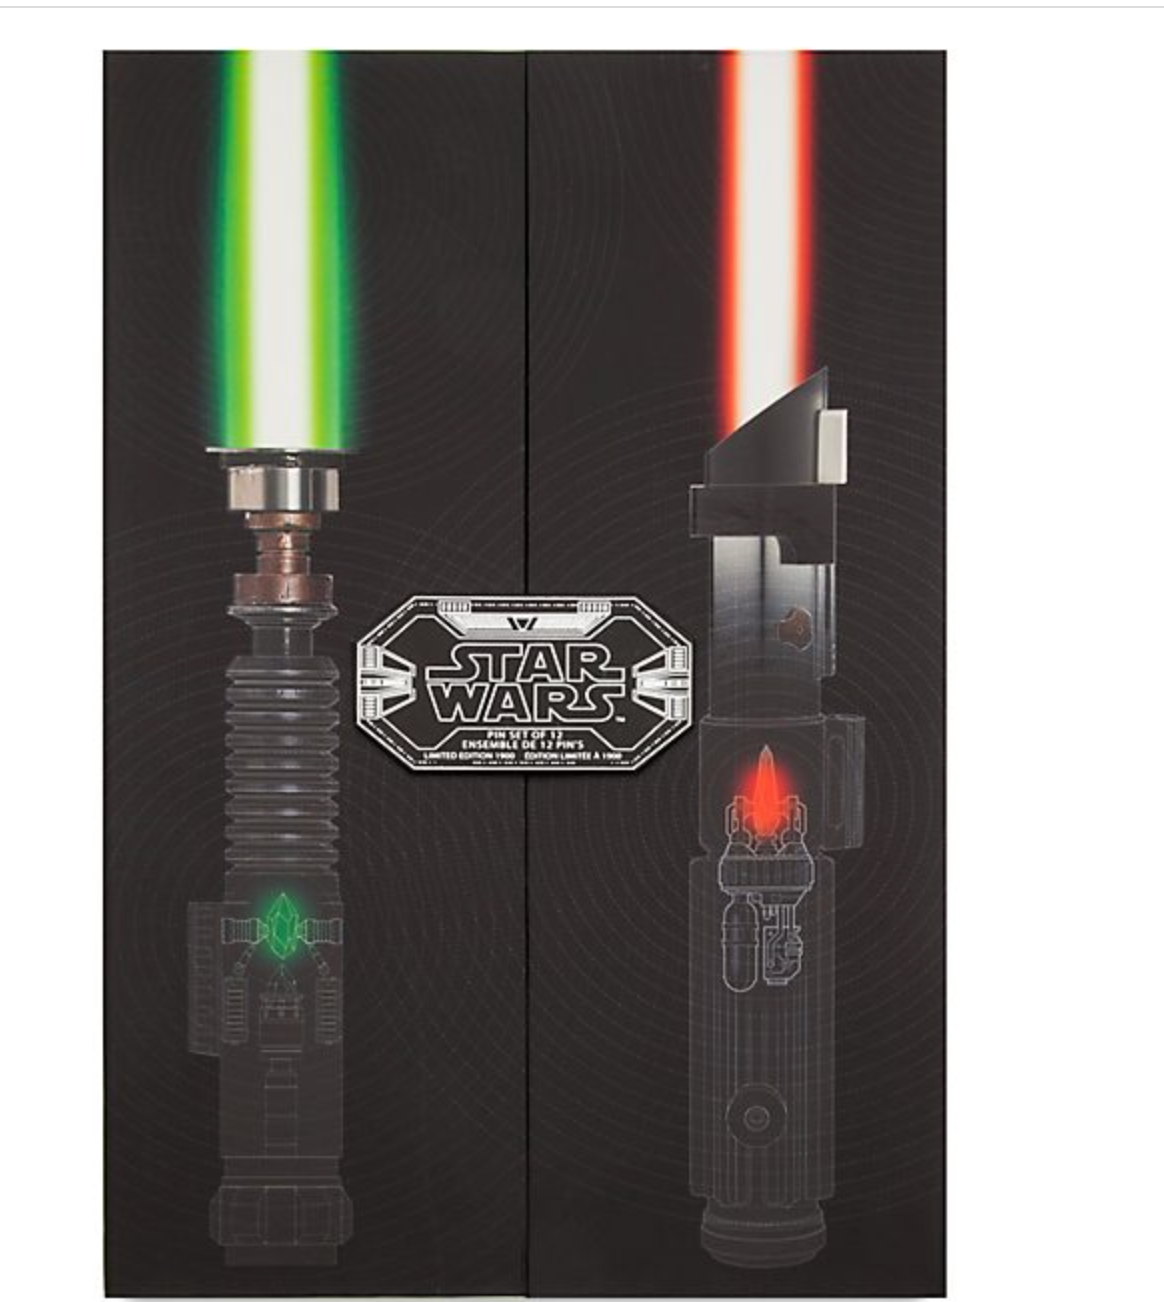 Disney Store Star Wars Lightsabers Limited Edition Pin Set New with Box